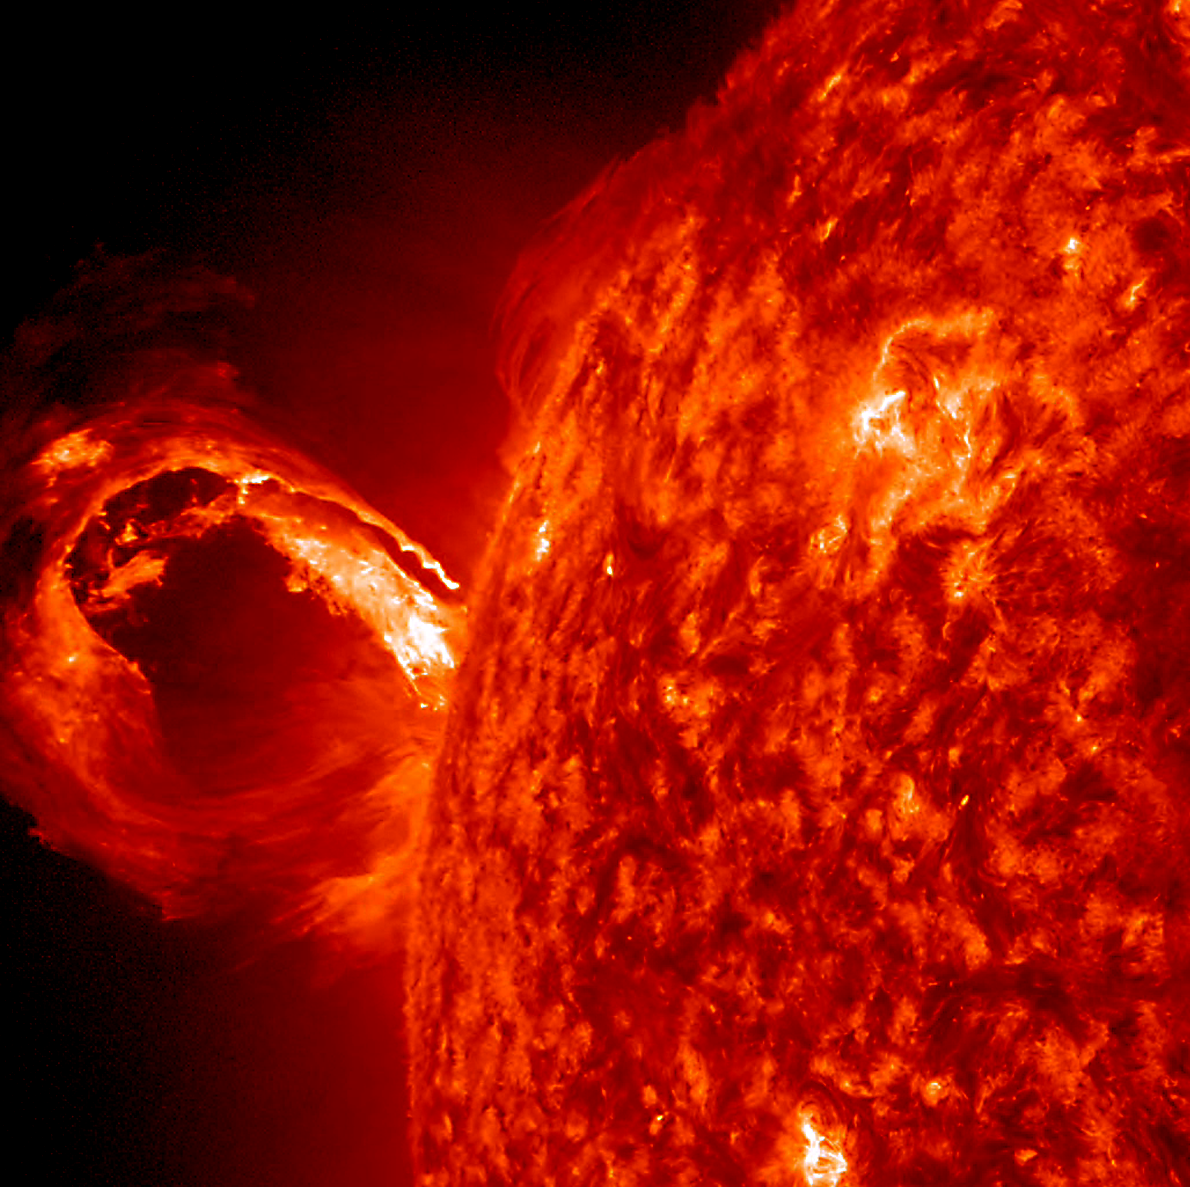 Powerful eruption from the surface of the sun captured on May 1, 2013. NASA